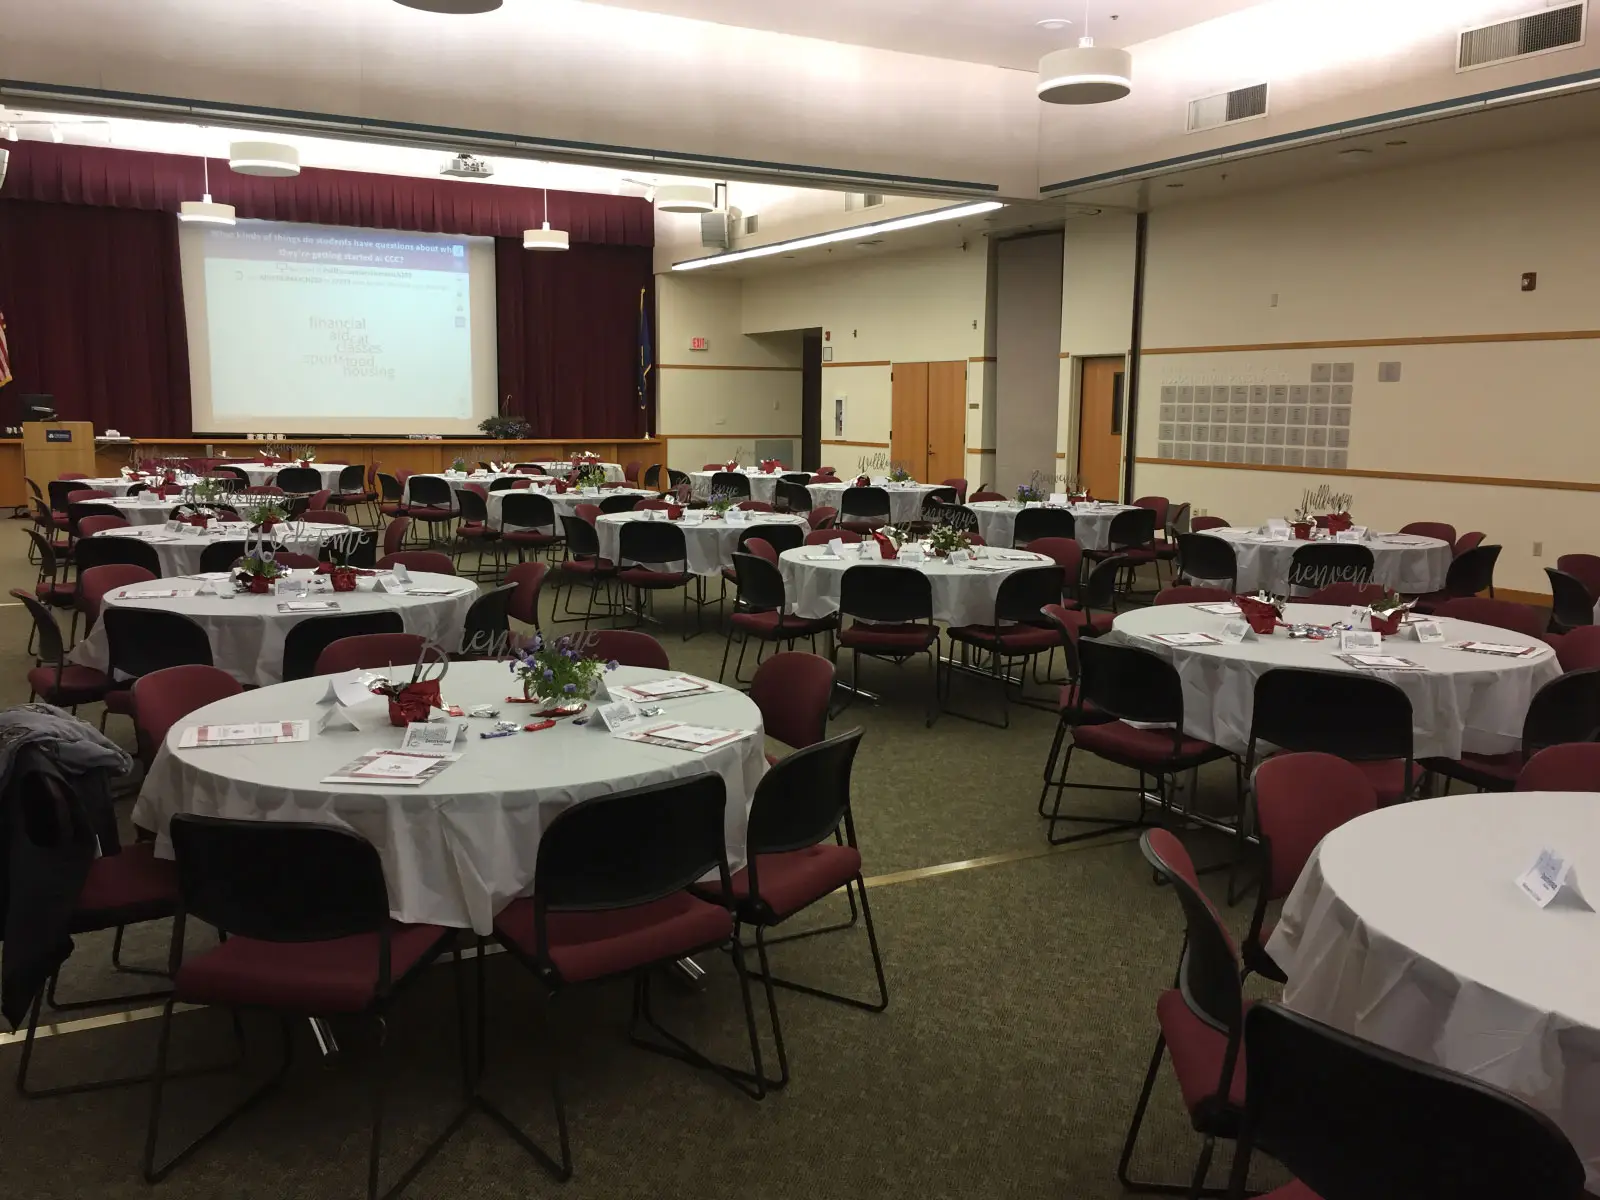 Many tables with red chairs, table centerpieces and silverware with a projector screen at the front of the room